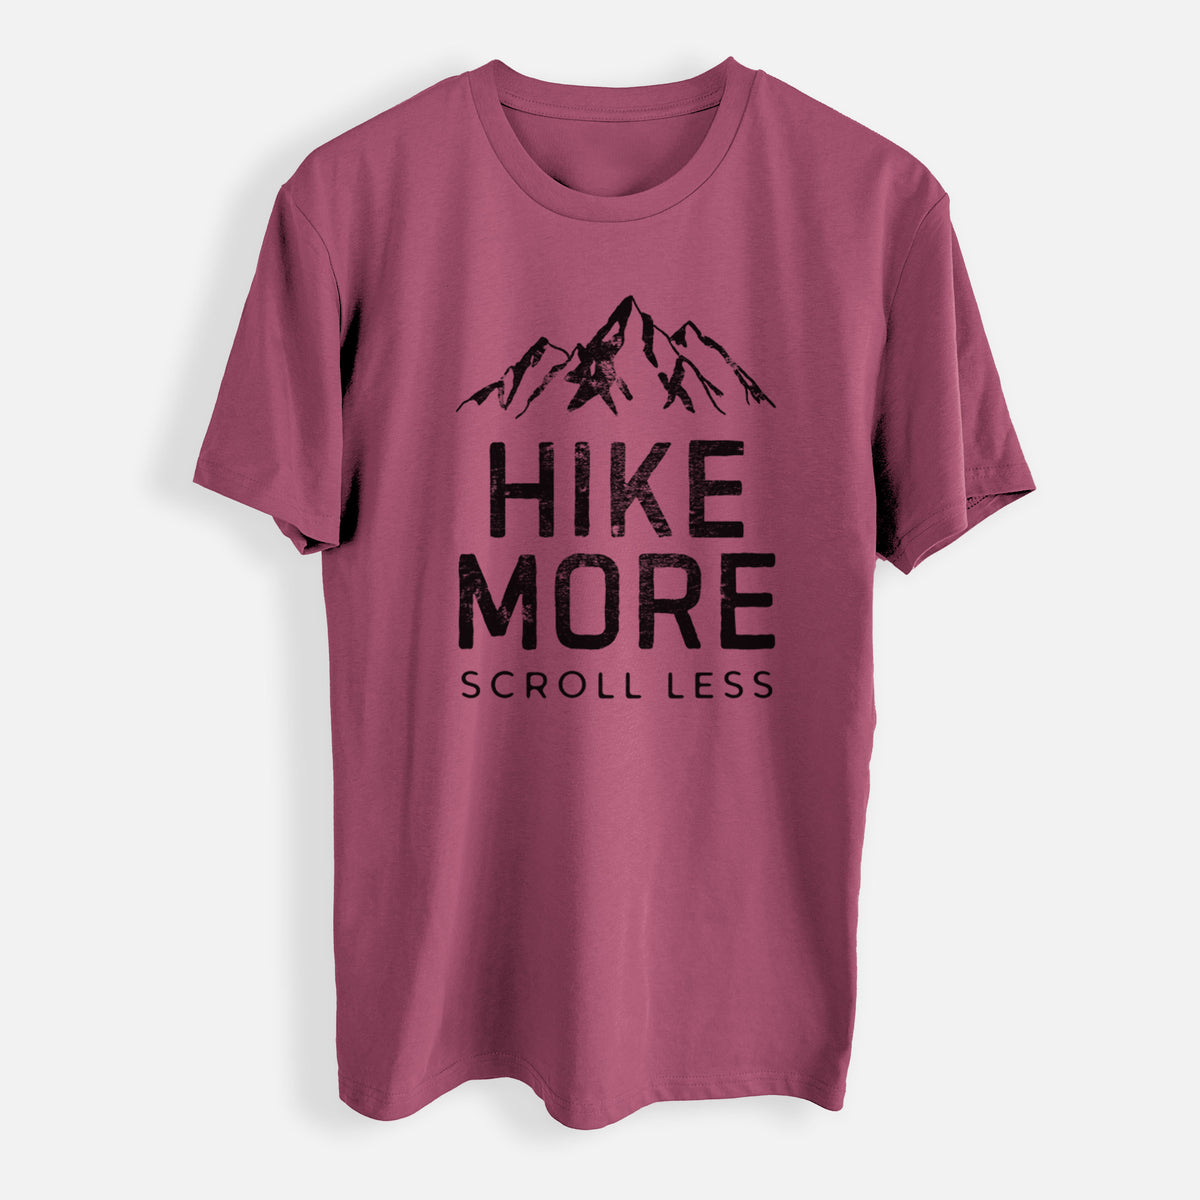 Hike More - Scroll Less - Mens Everyday Staple Tee